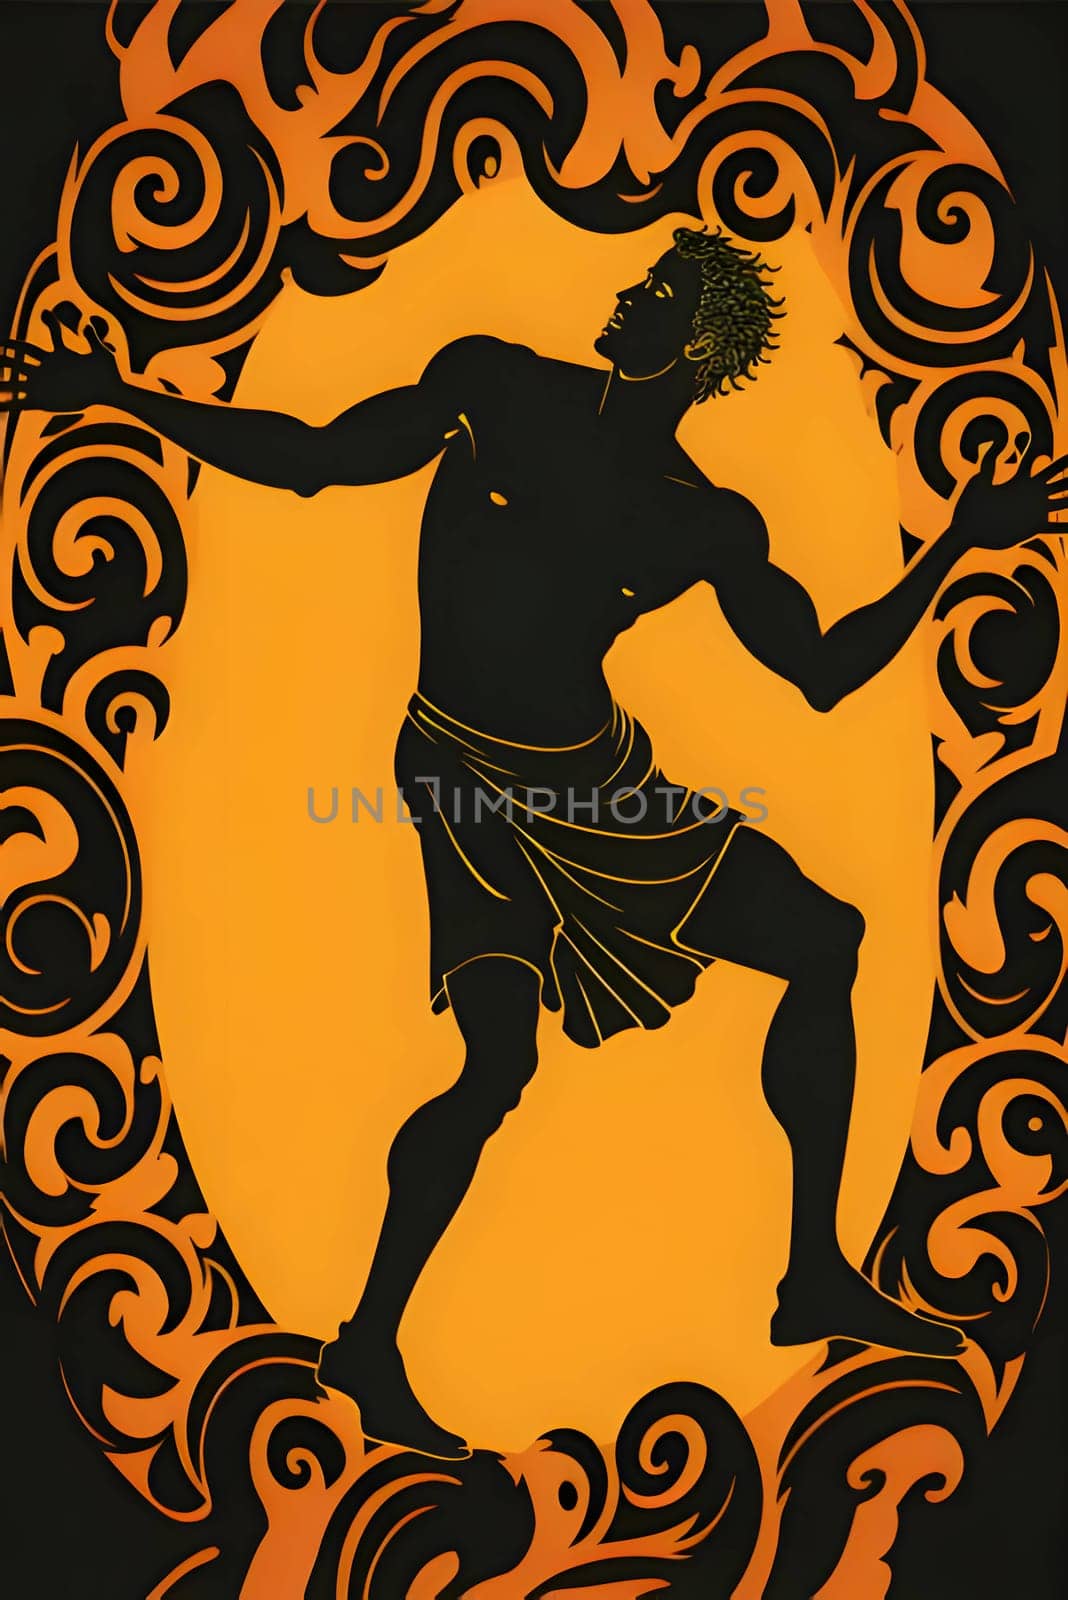 Vector illustration of ancient man in black silhouette against a clean orange background, capturing graceful forms.